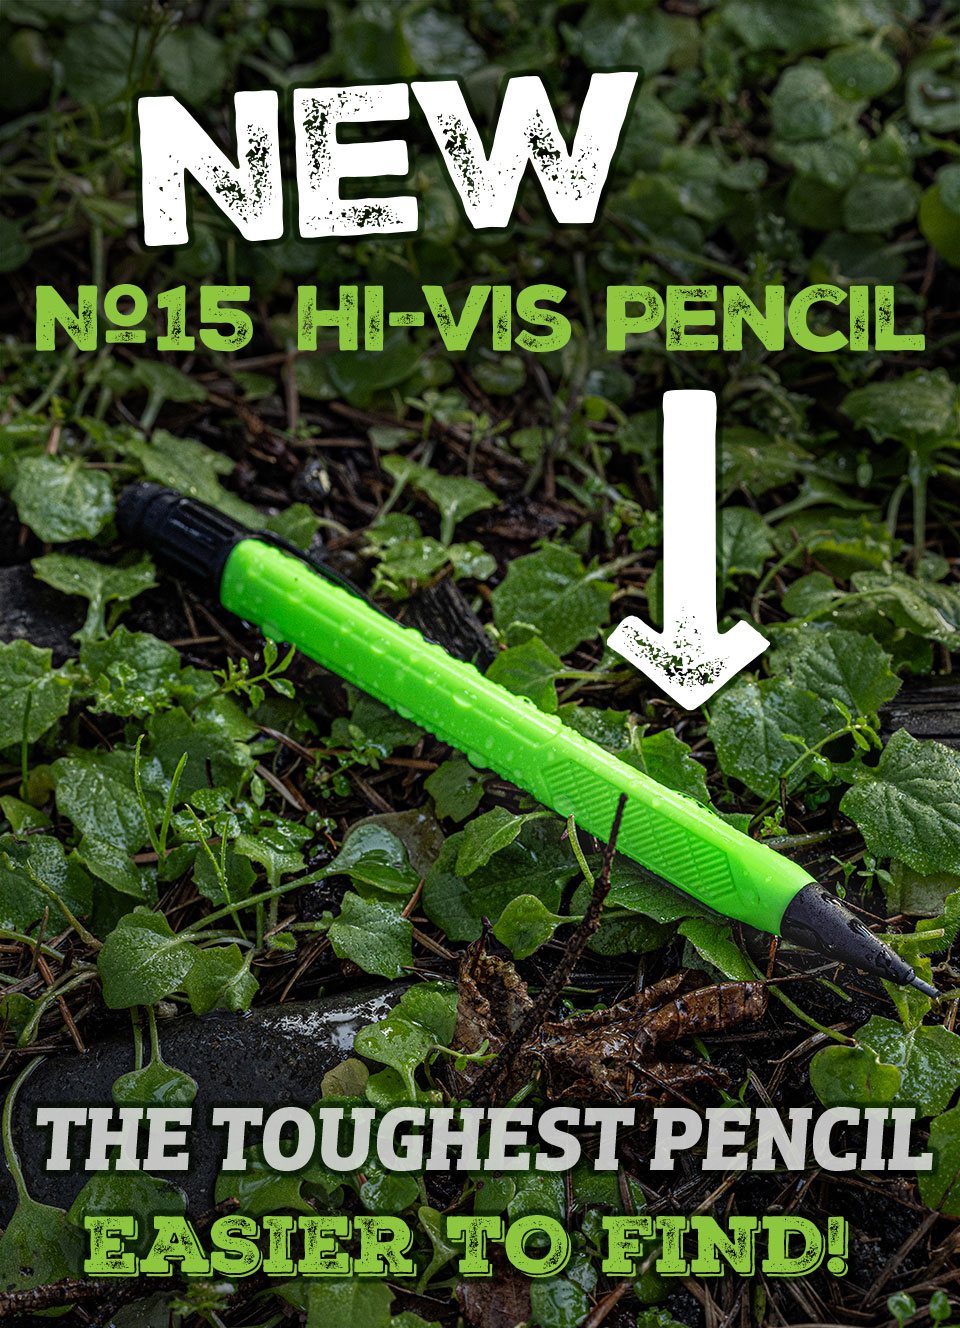 This new powerful pencil is tough and easy to find.